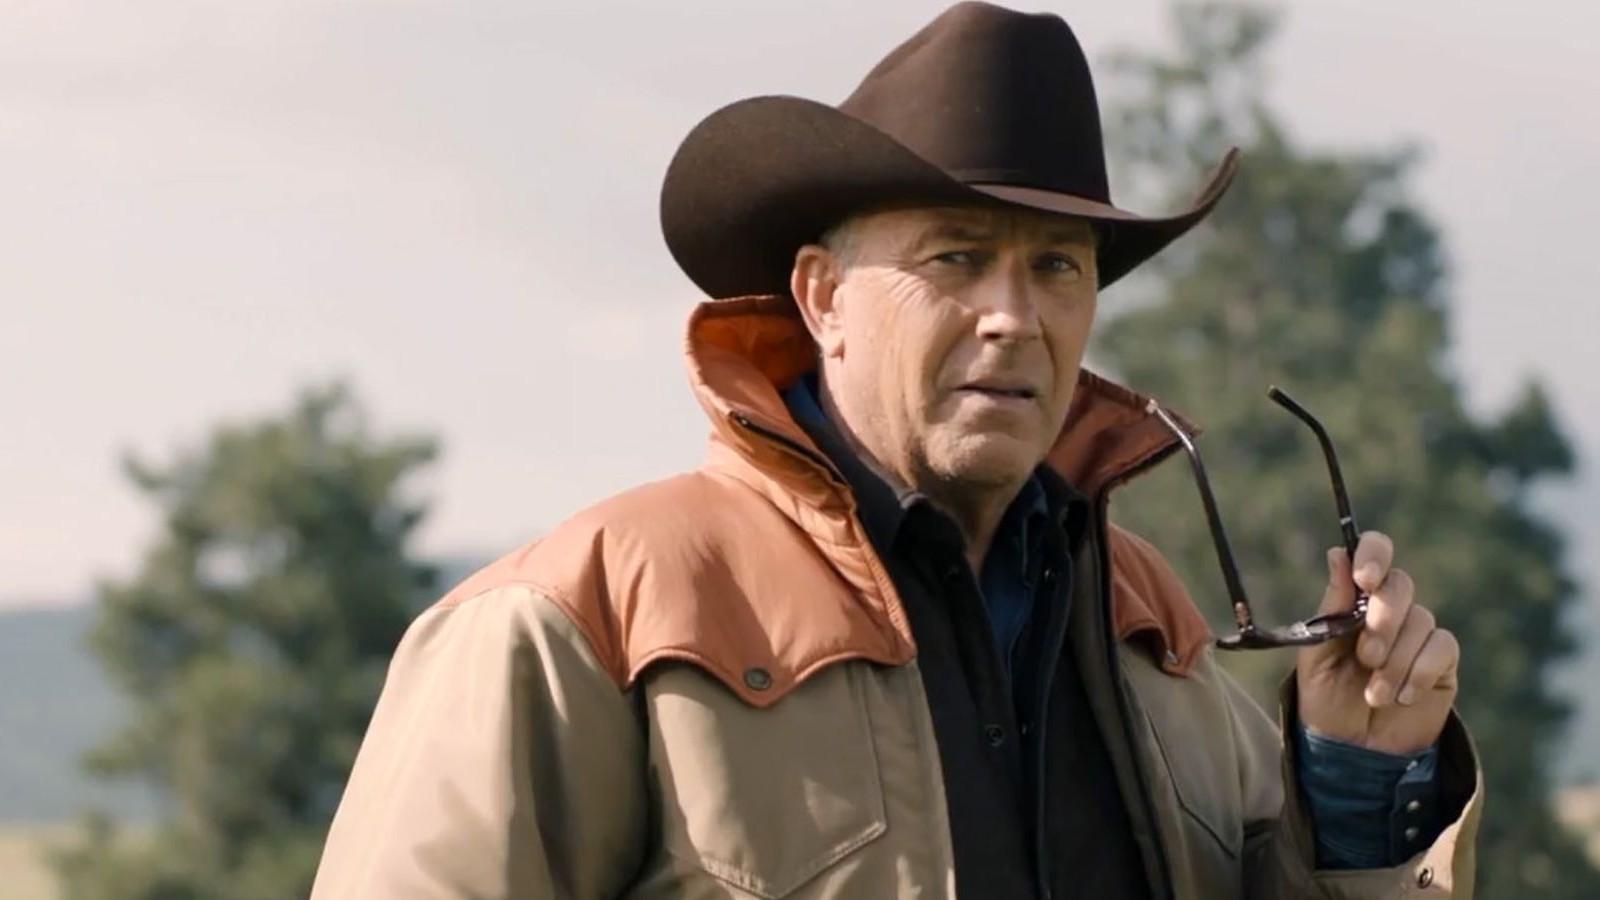 Kevin Costner as John Dutton in Yellowstone, holding his sunglasses